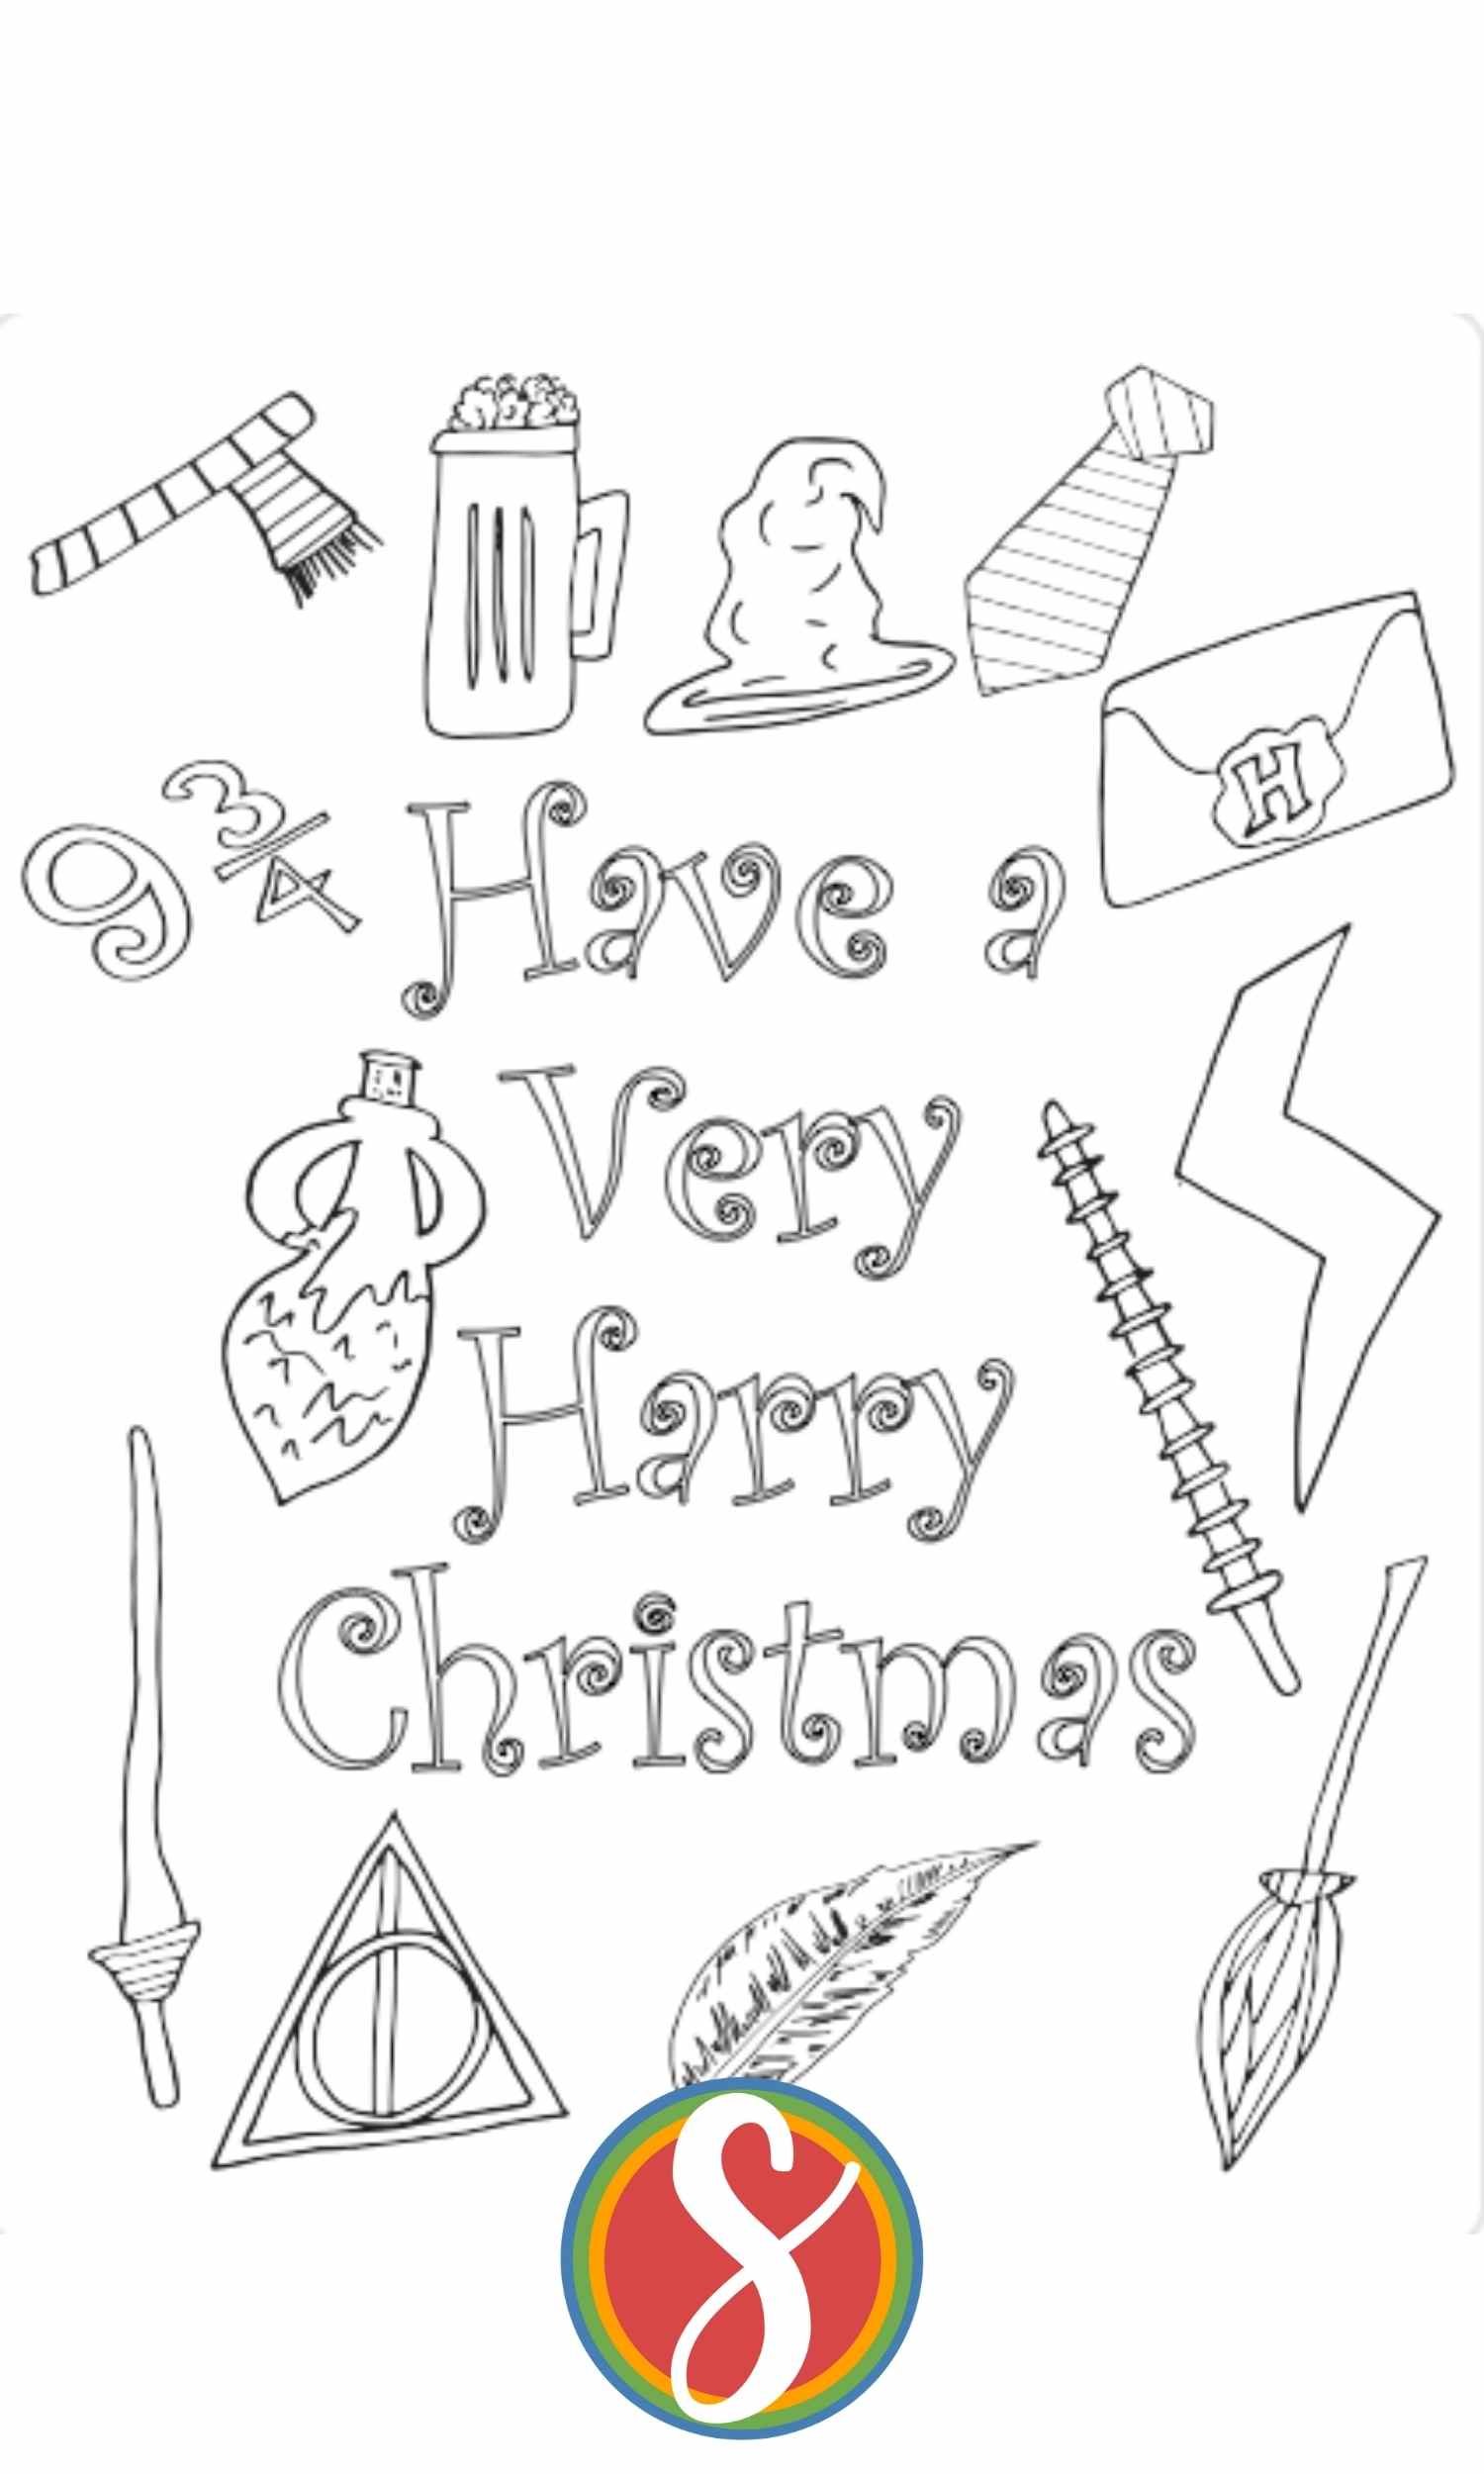 colorable words "have a very Harry Christmas" with Harry Potter images all around to color